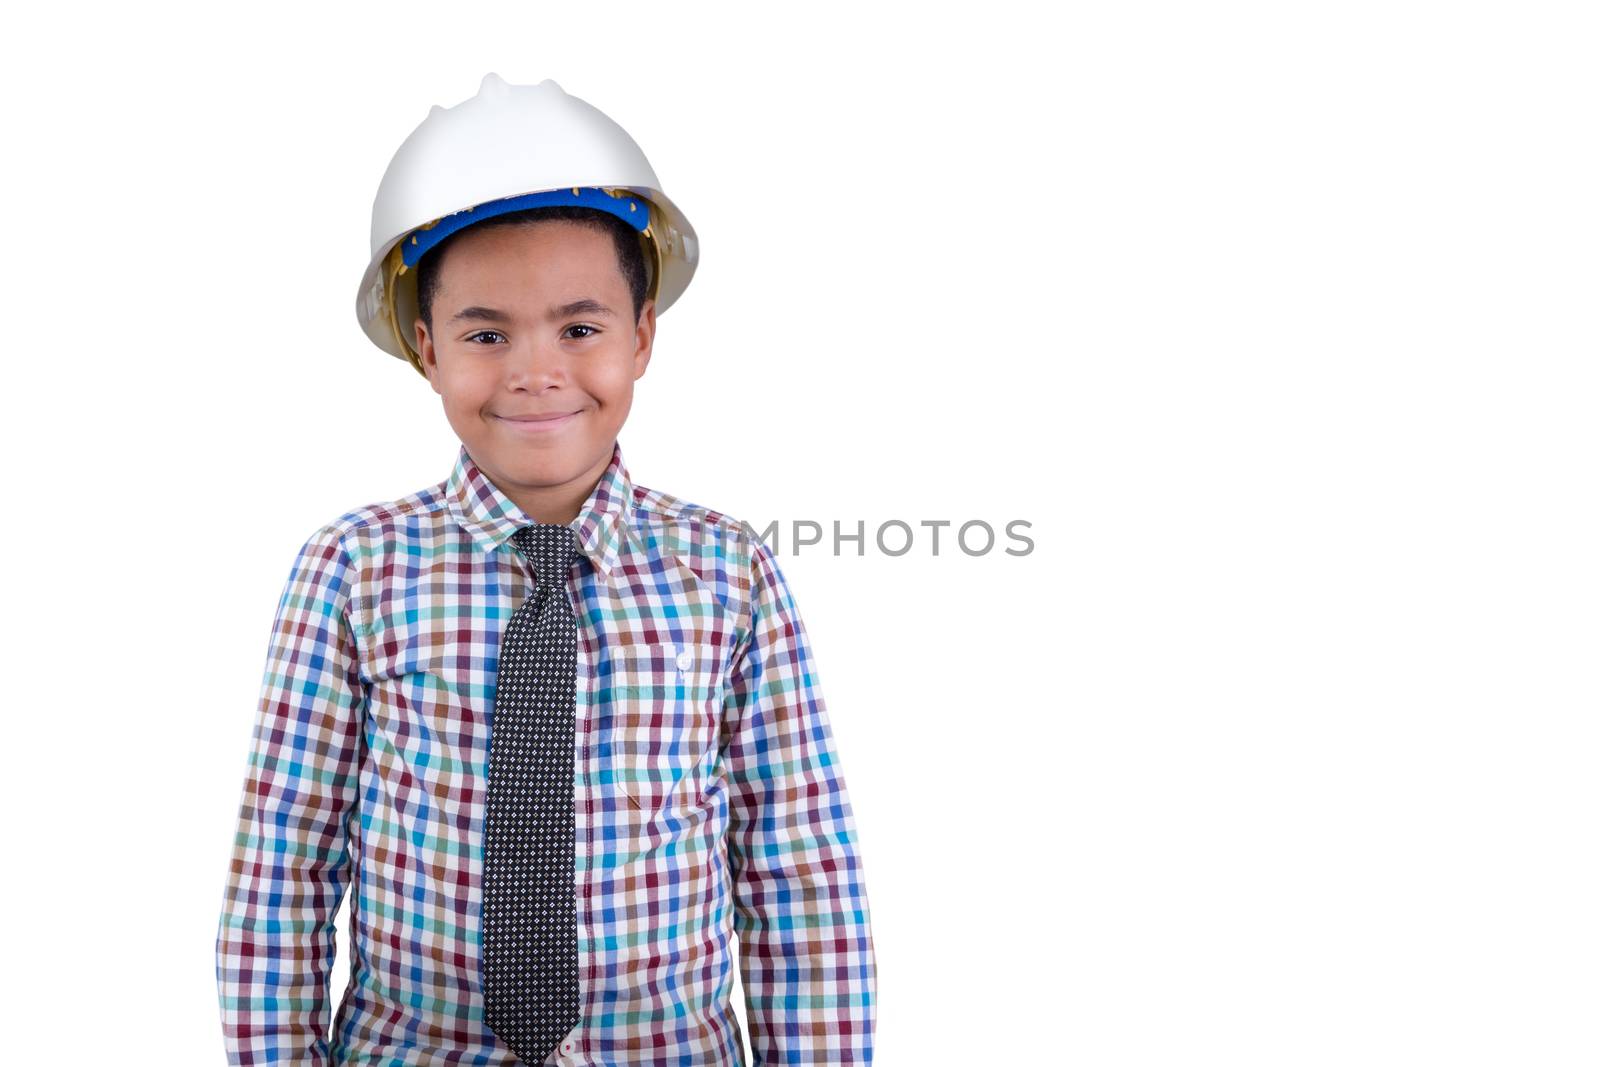 Future young African American engineer by coskun